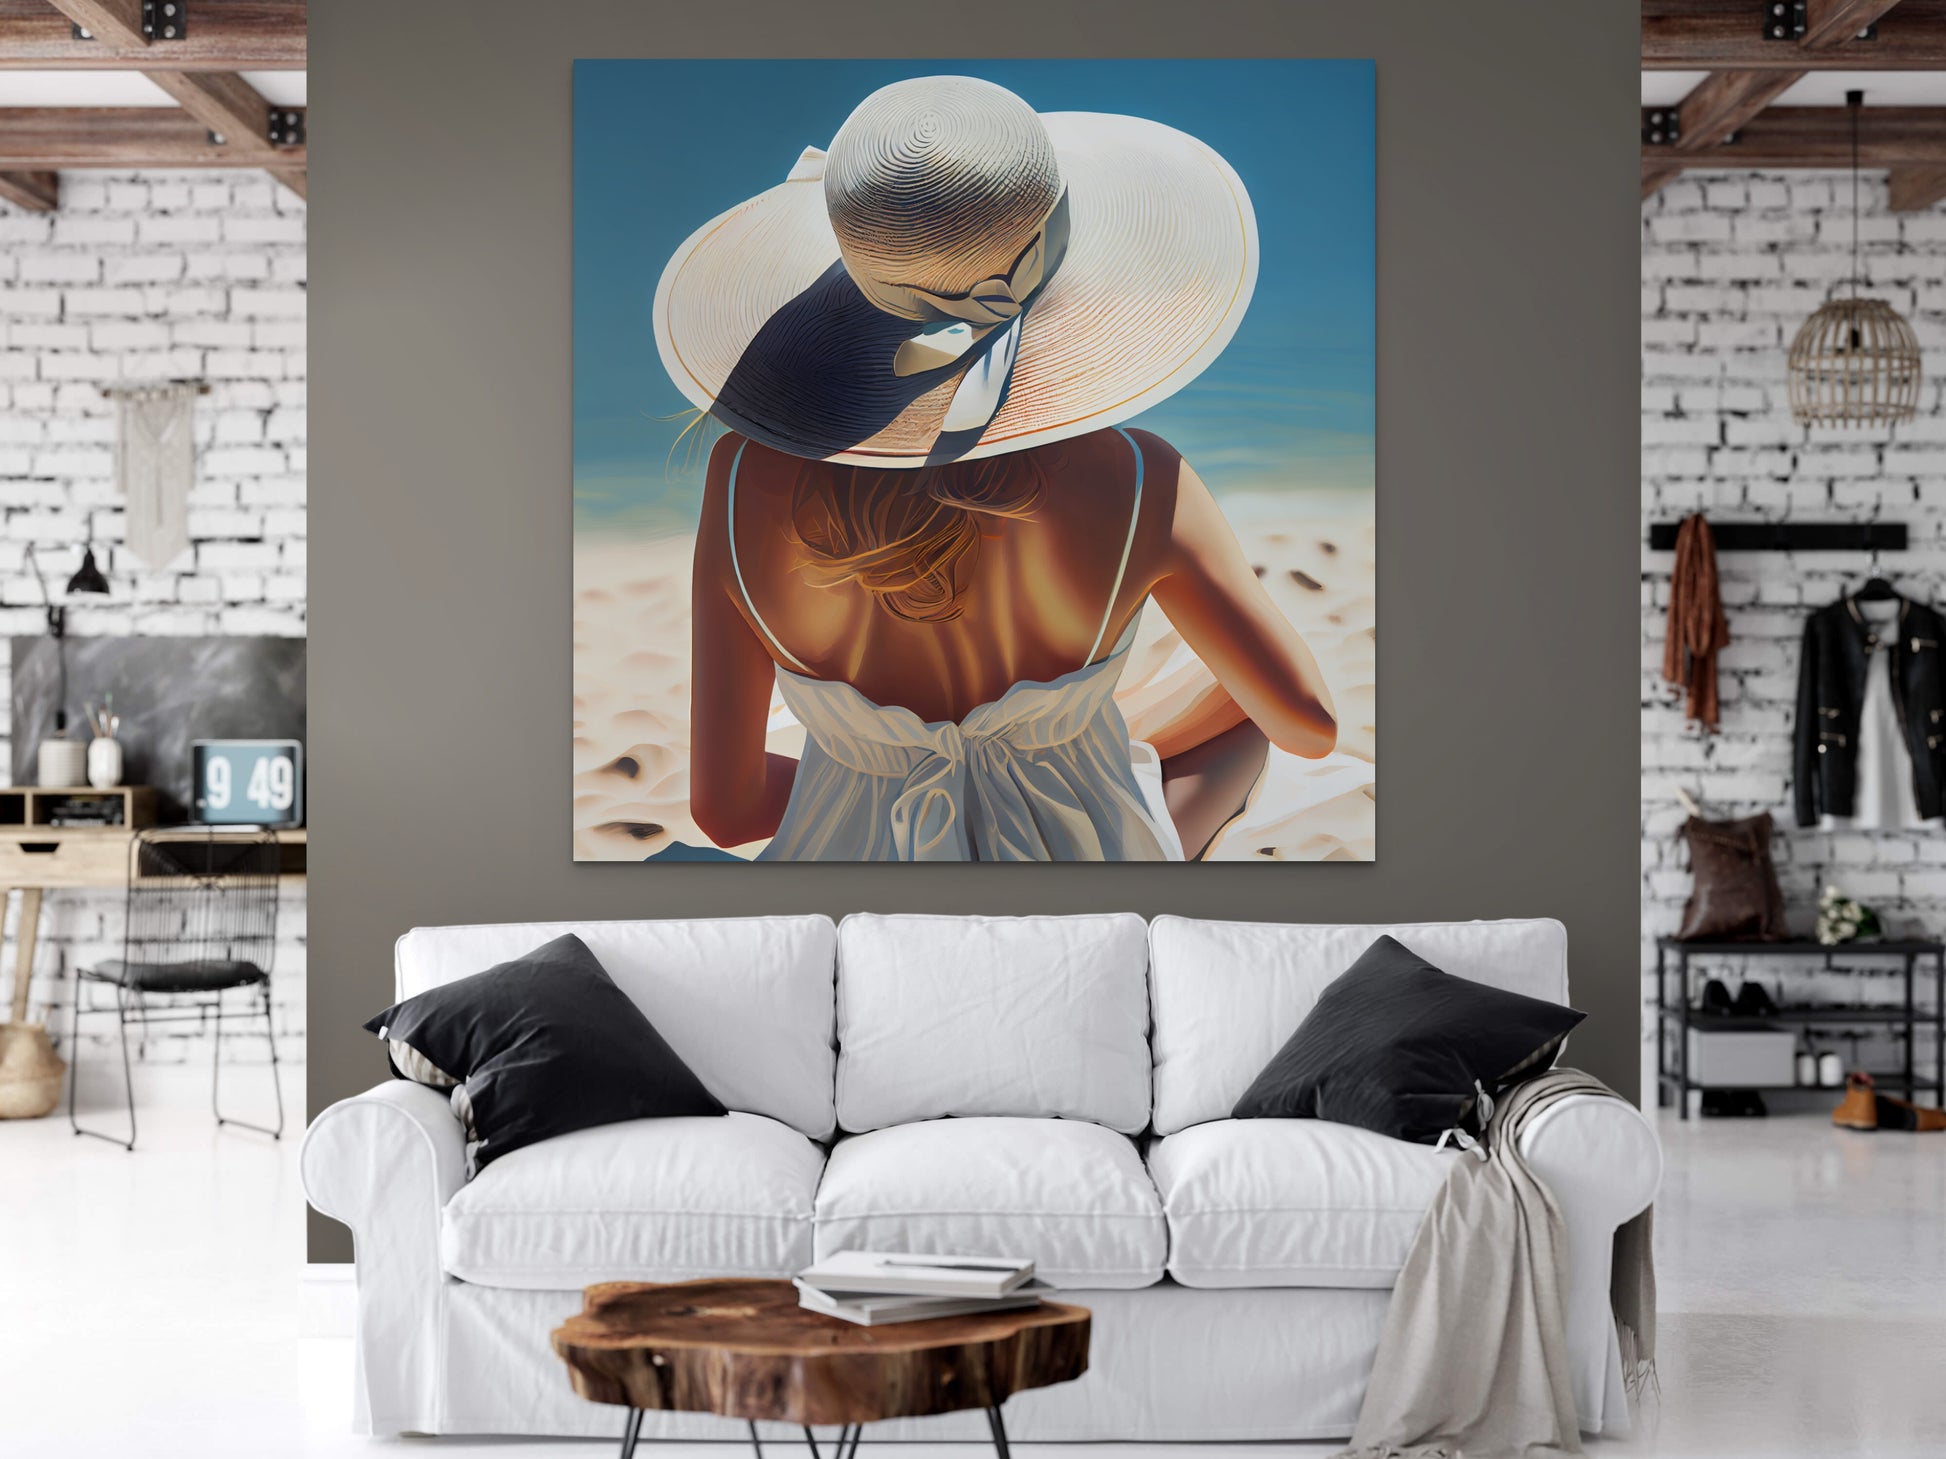 A Stunning Airbrush Illustration of a Woman in a White Dress Sunbathin